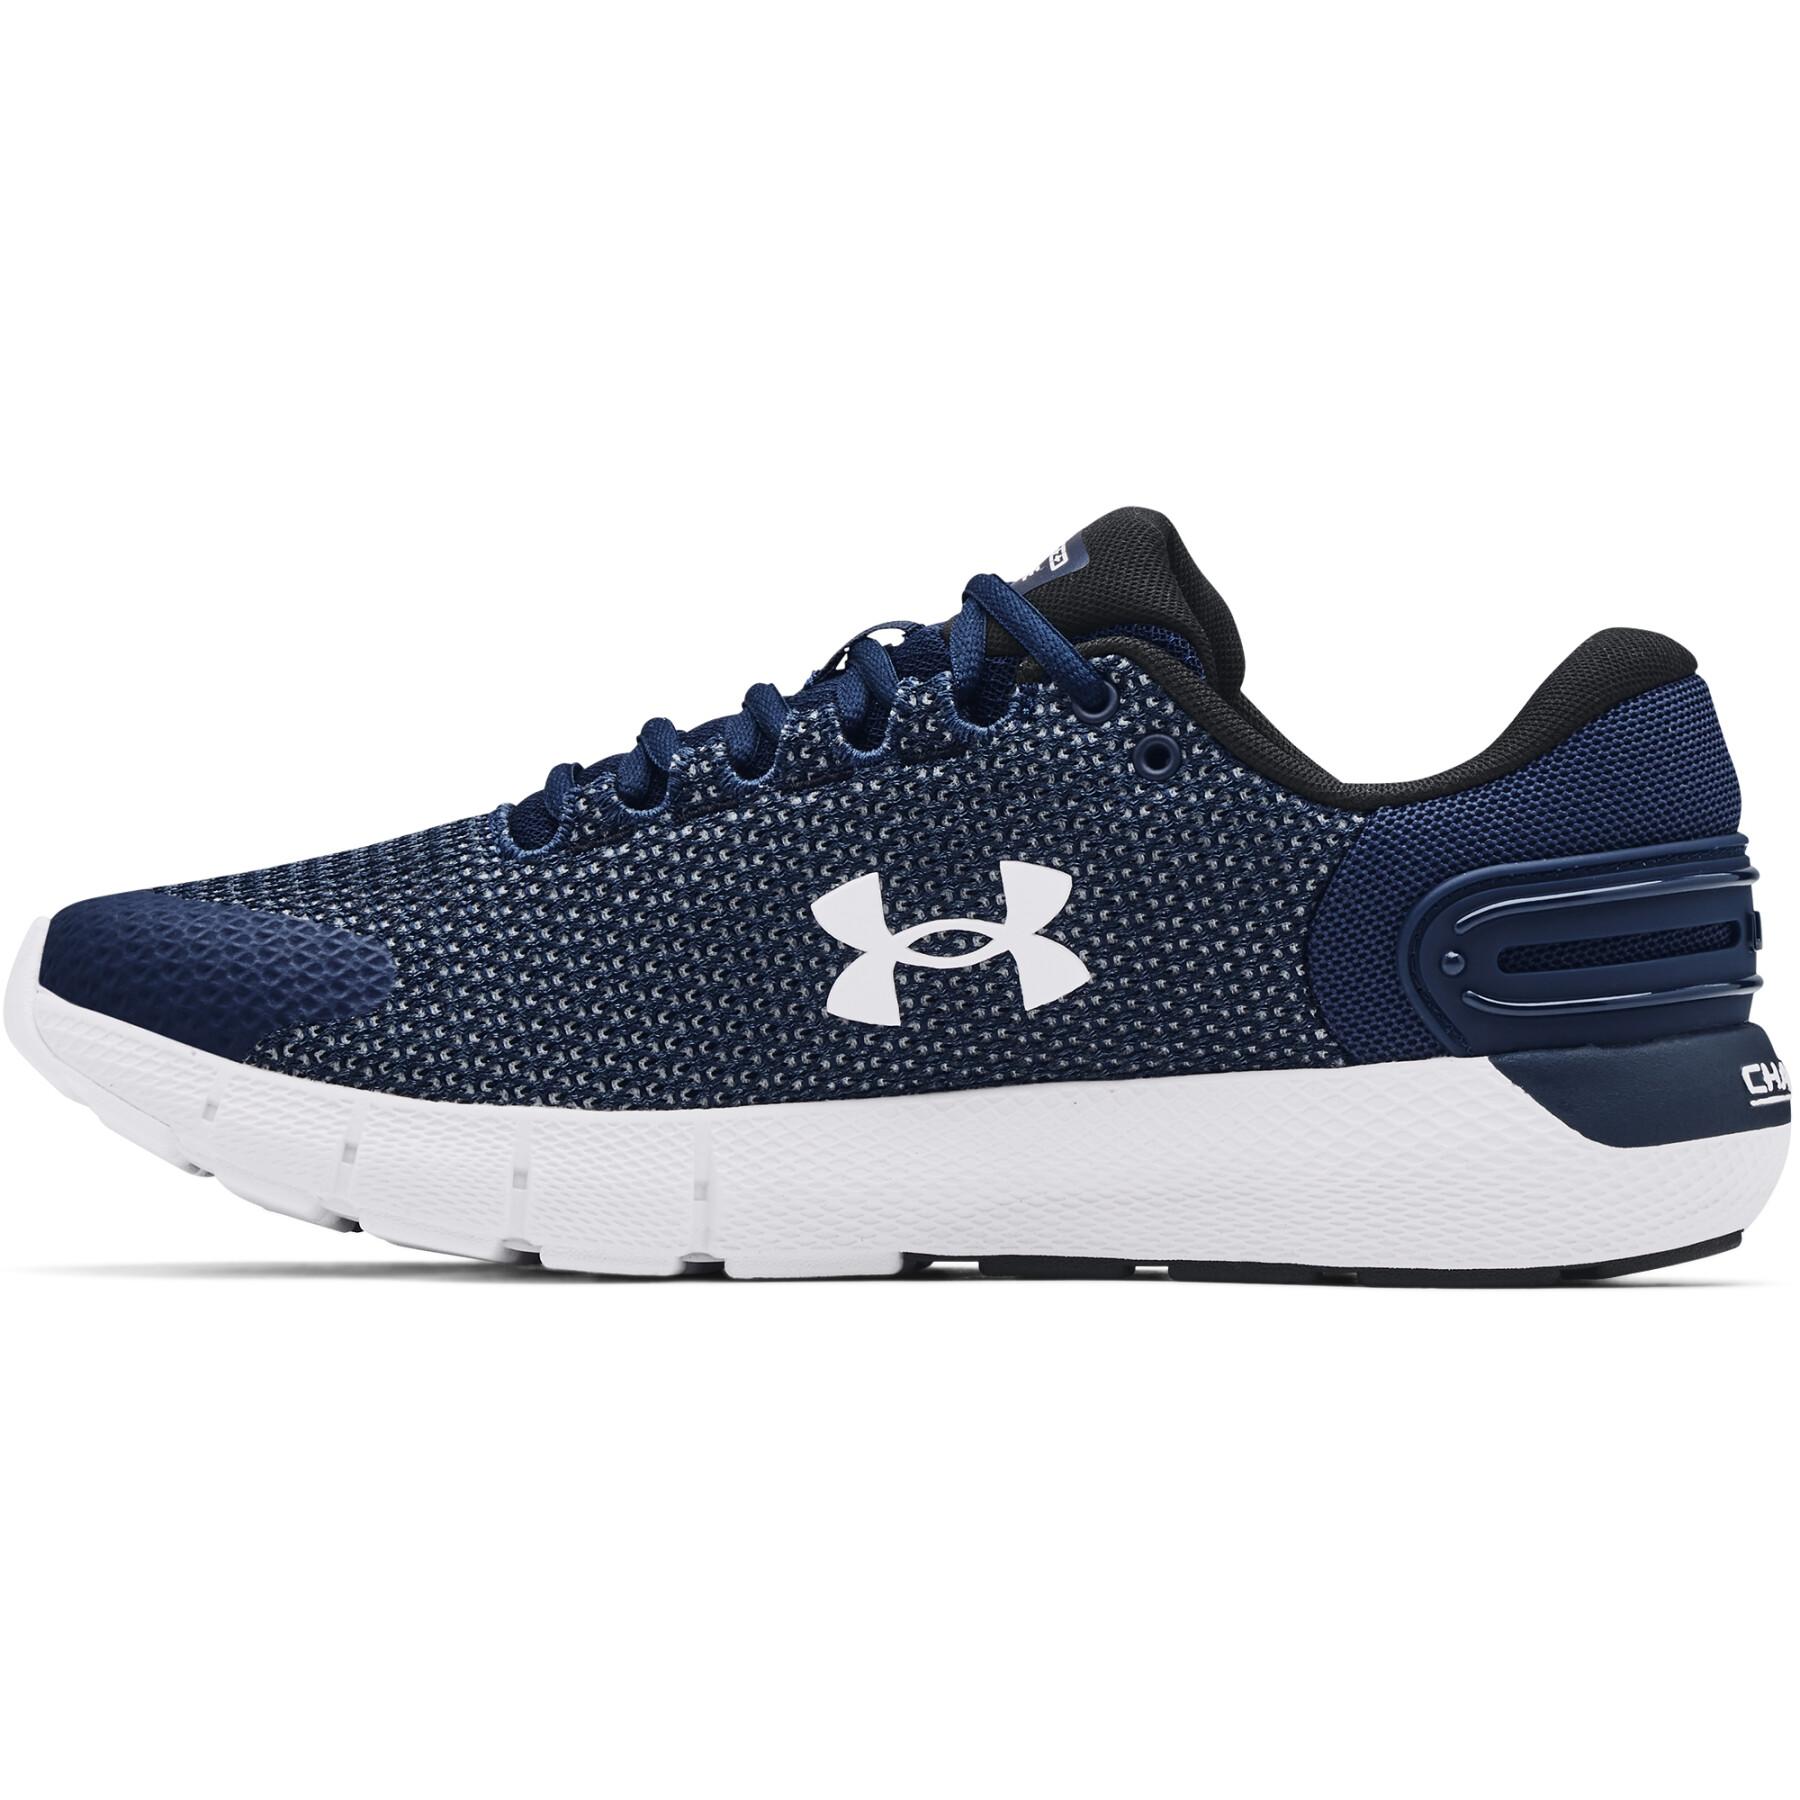 Chaussures de running Under Armour Charged Rogue 2.5